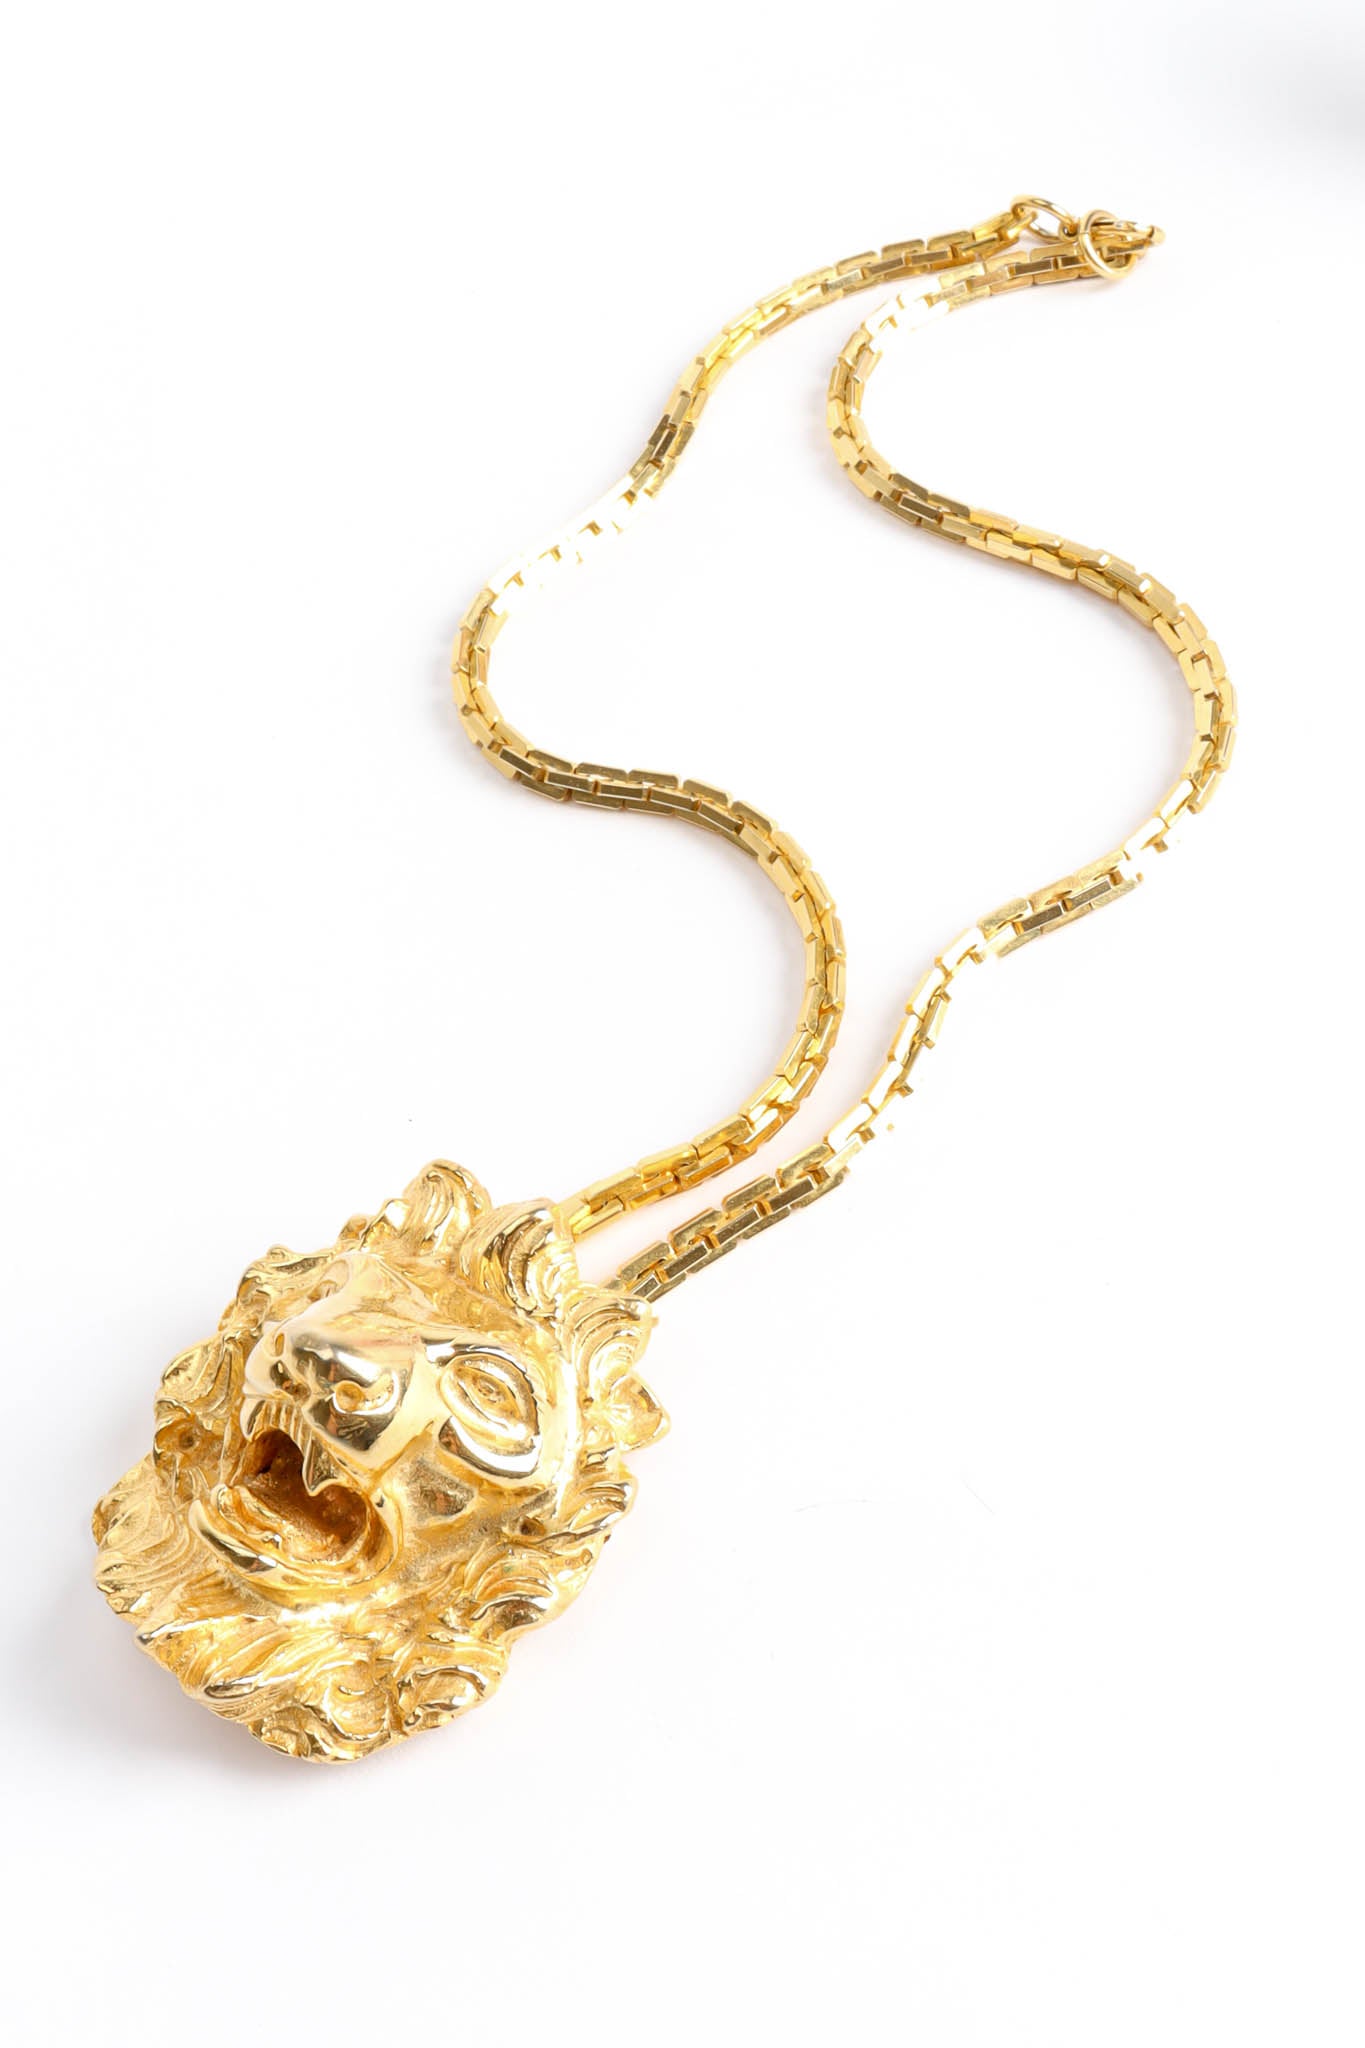 Vintage Judith Leiber Lion Brooch Pendant Necklace angle @ Recess Los Angeles